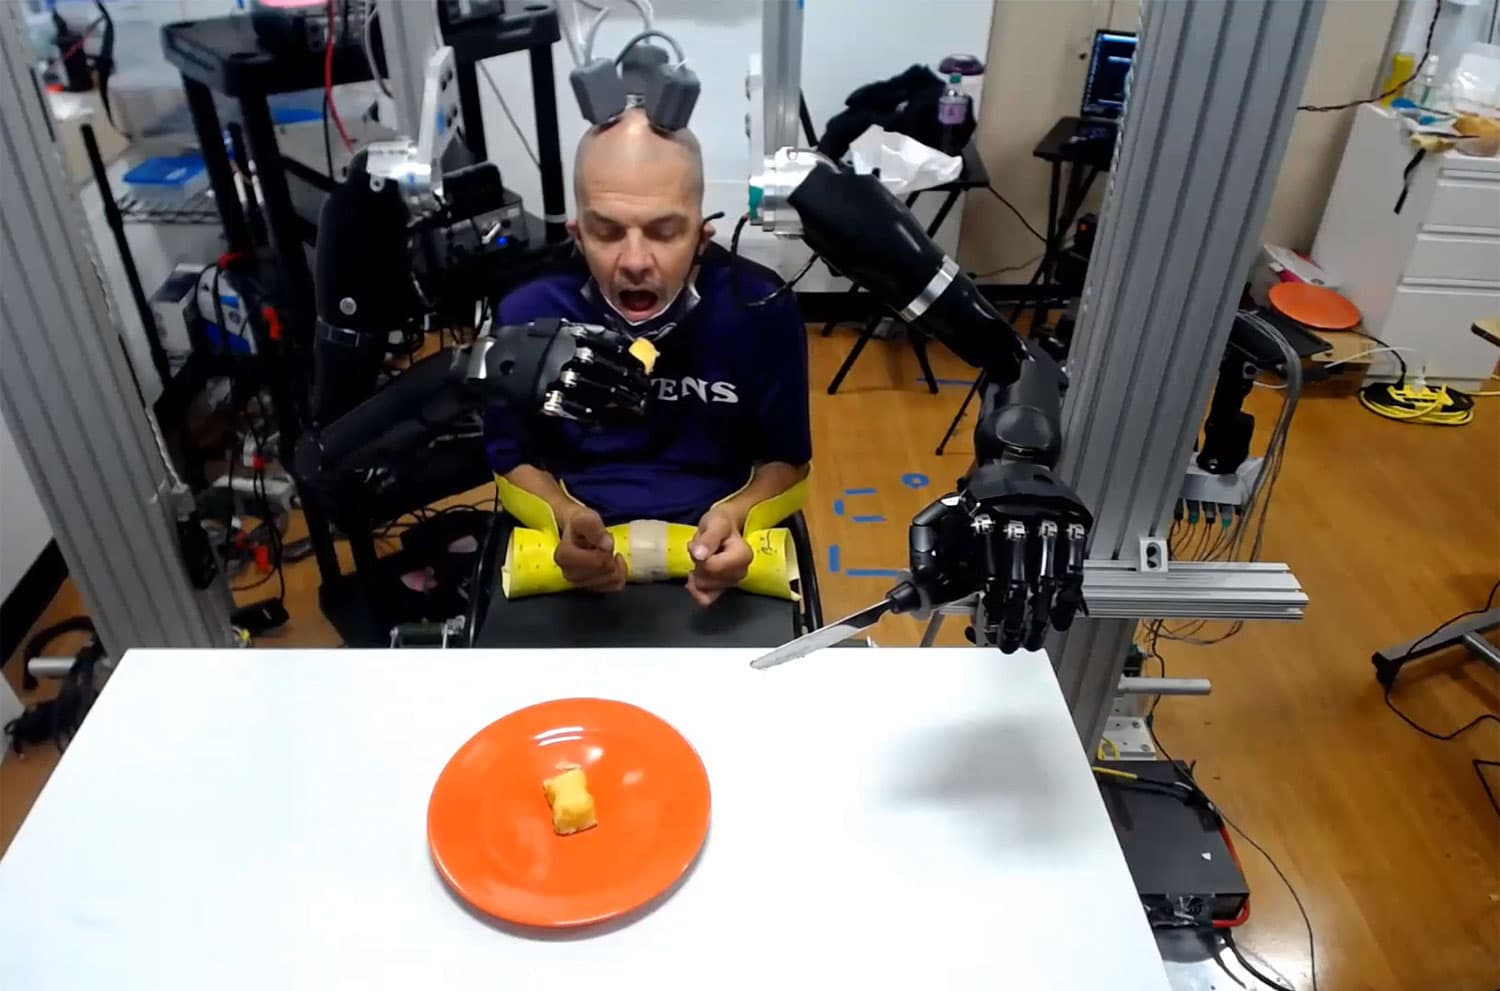 Quadriplegic patient uses brain signals to feed himself with two prosthetic arms.